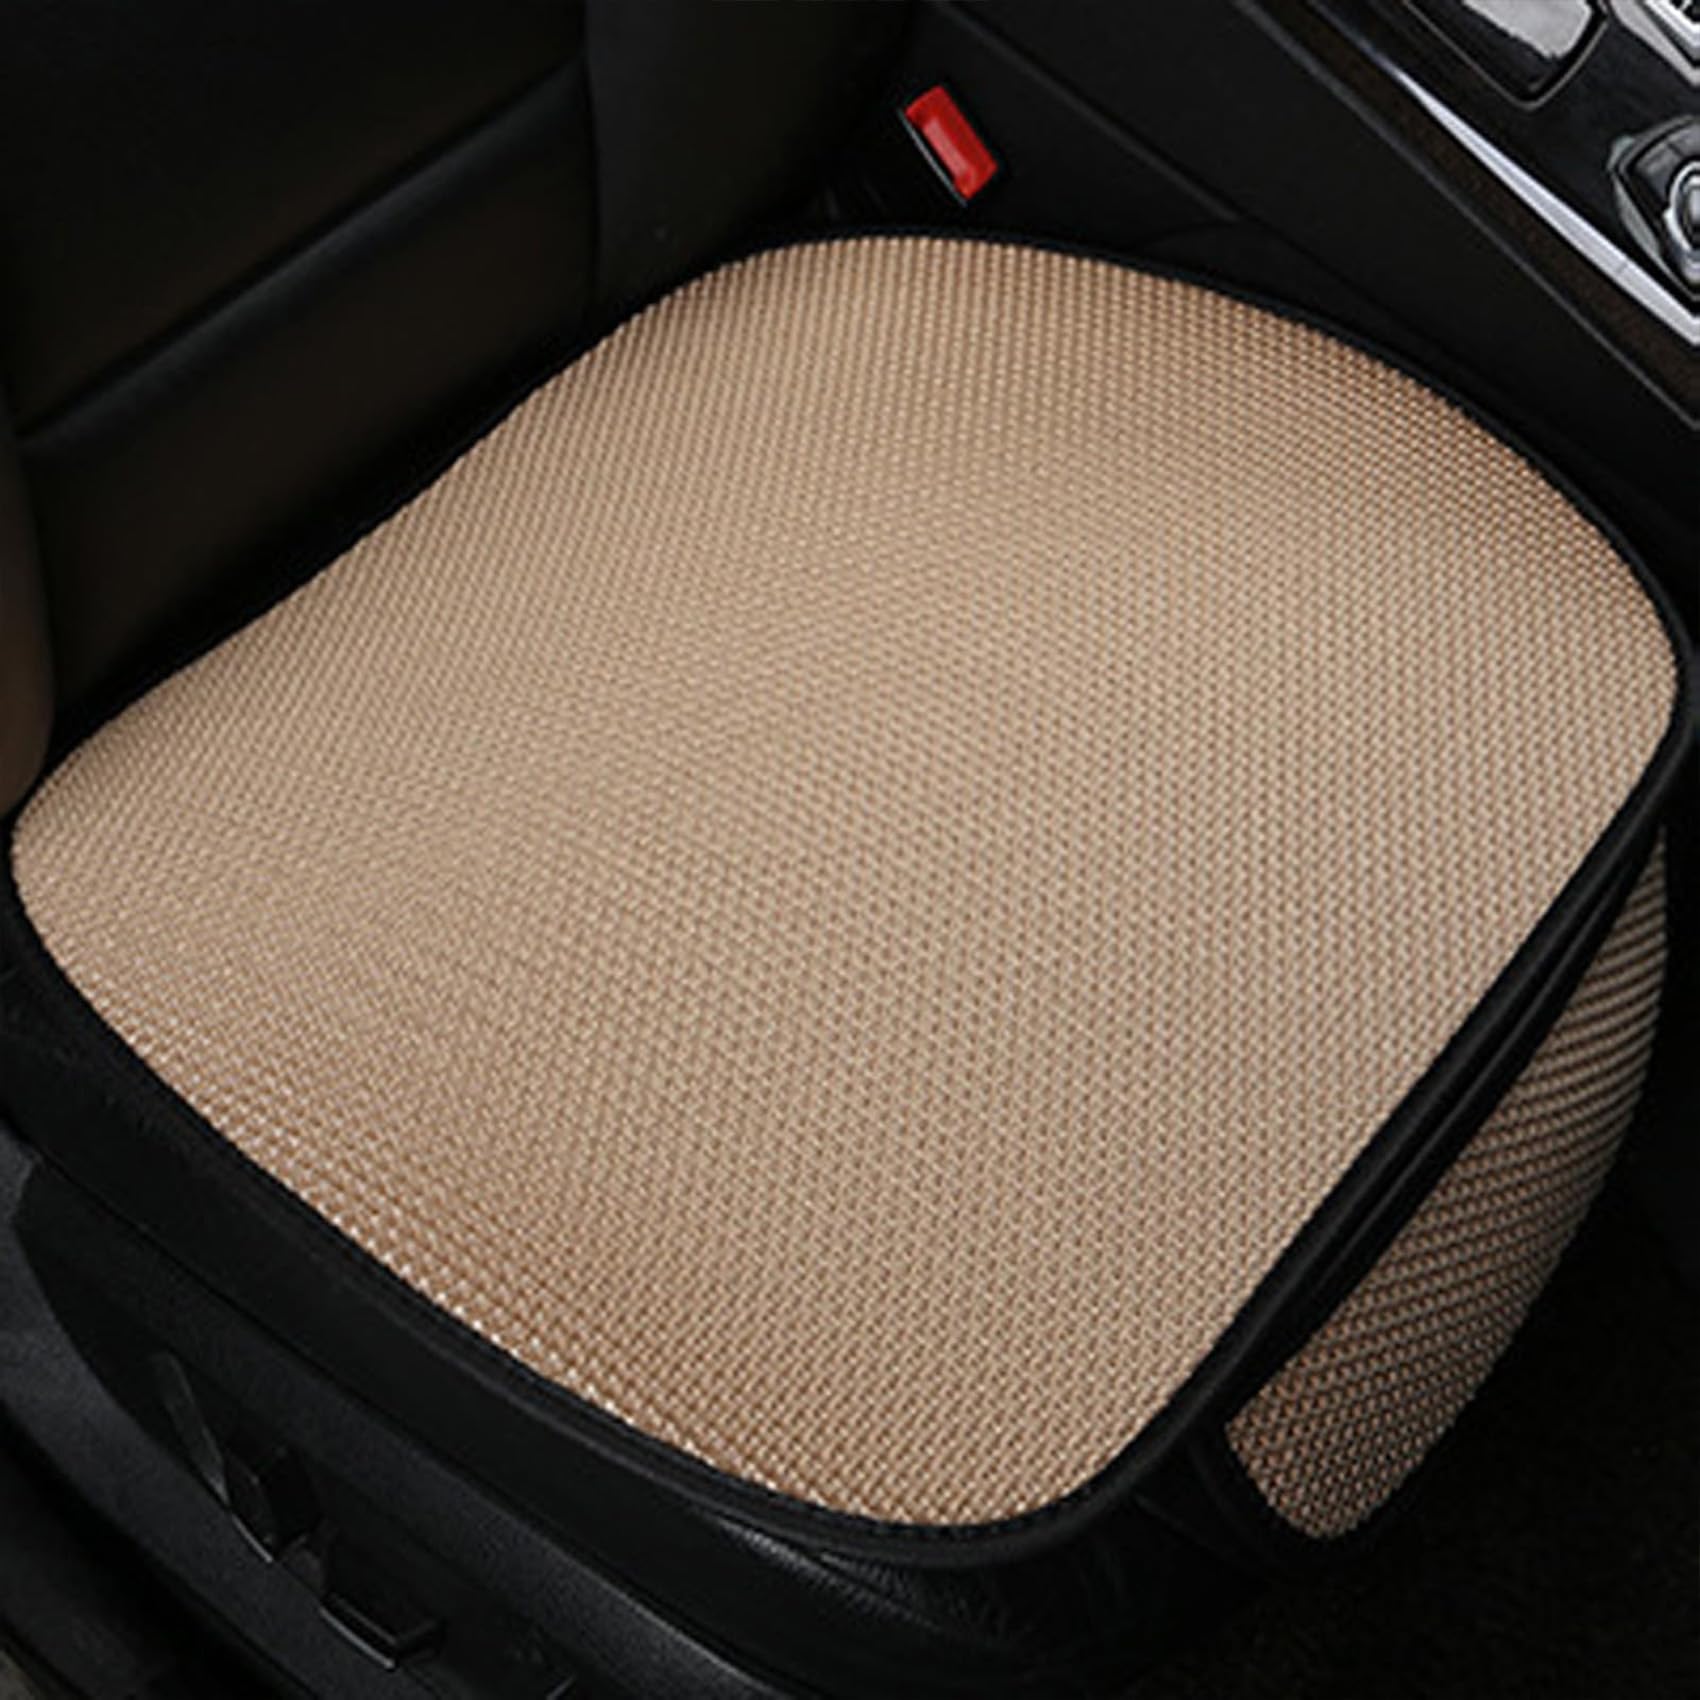 Non-slip Car Seat Pad for Summer Breathable and Refreshing, Breathable & Anti-Slip Cotton Car Seat Covers for Summer Heat, Universal Bottom Seat Covers for Cars of Front Seats (Beige,Front Seat) von YODAOLI